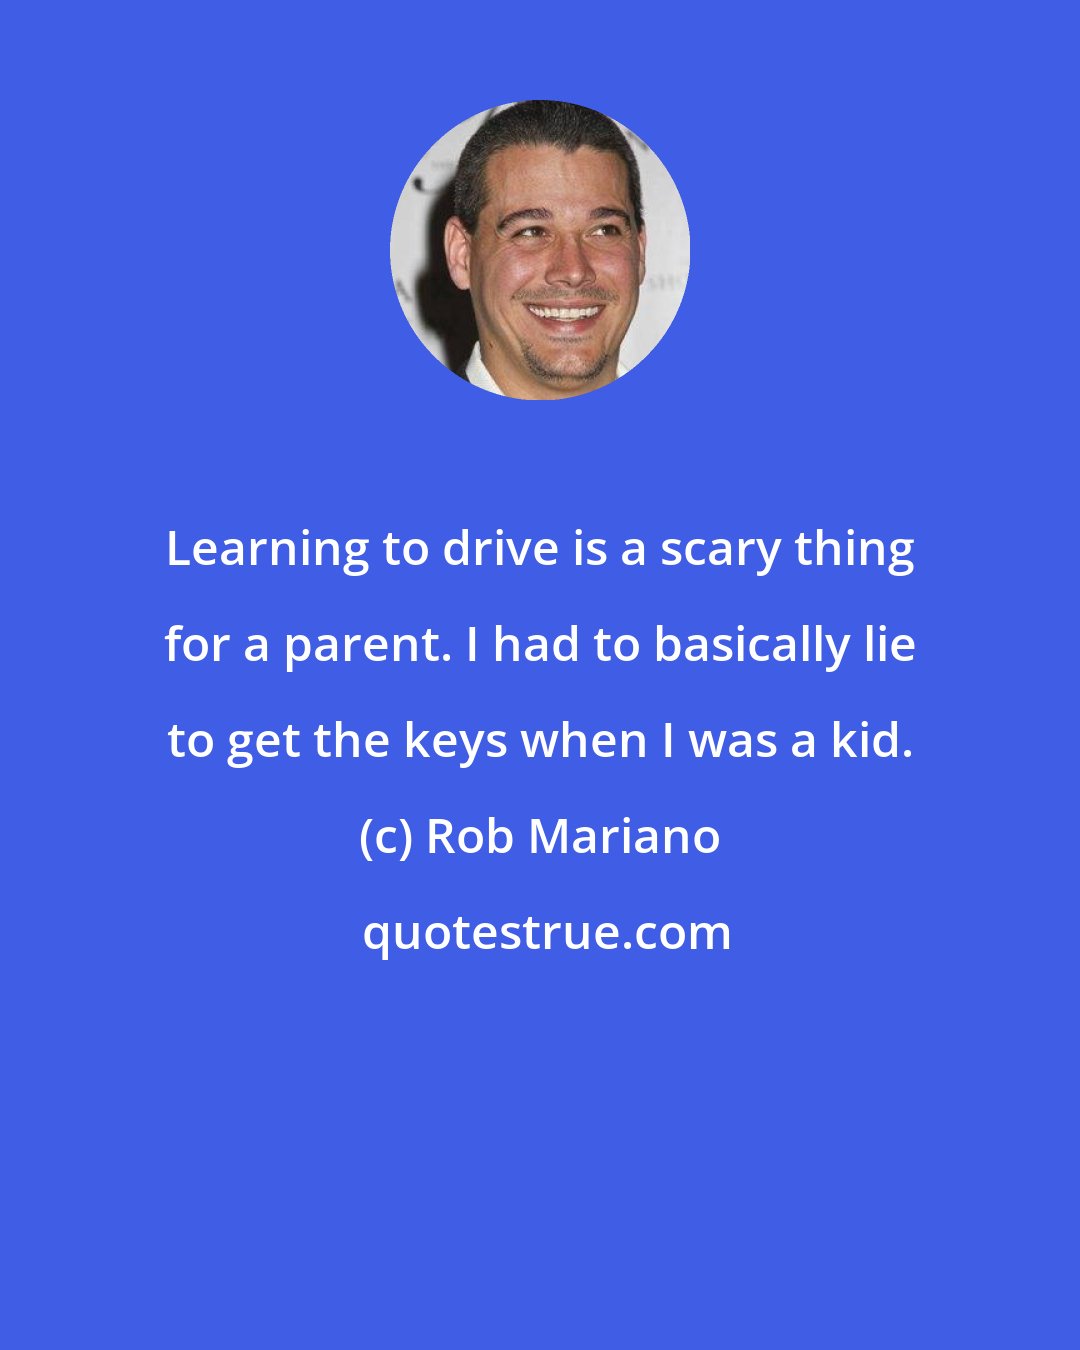 Rob Mariano: Learning to drive is a scary thing for a parent. I had to basically lie to get the keys when I was a kid.